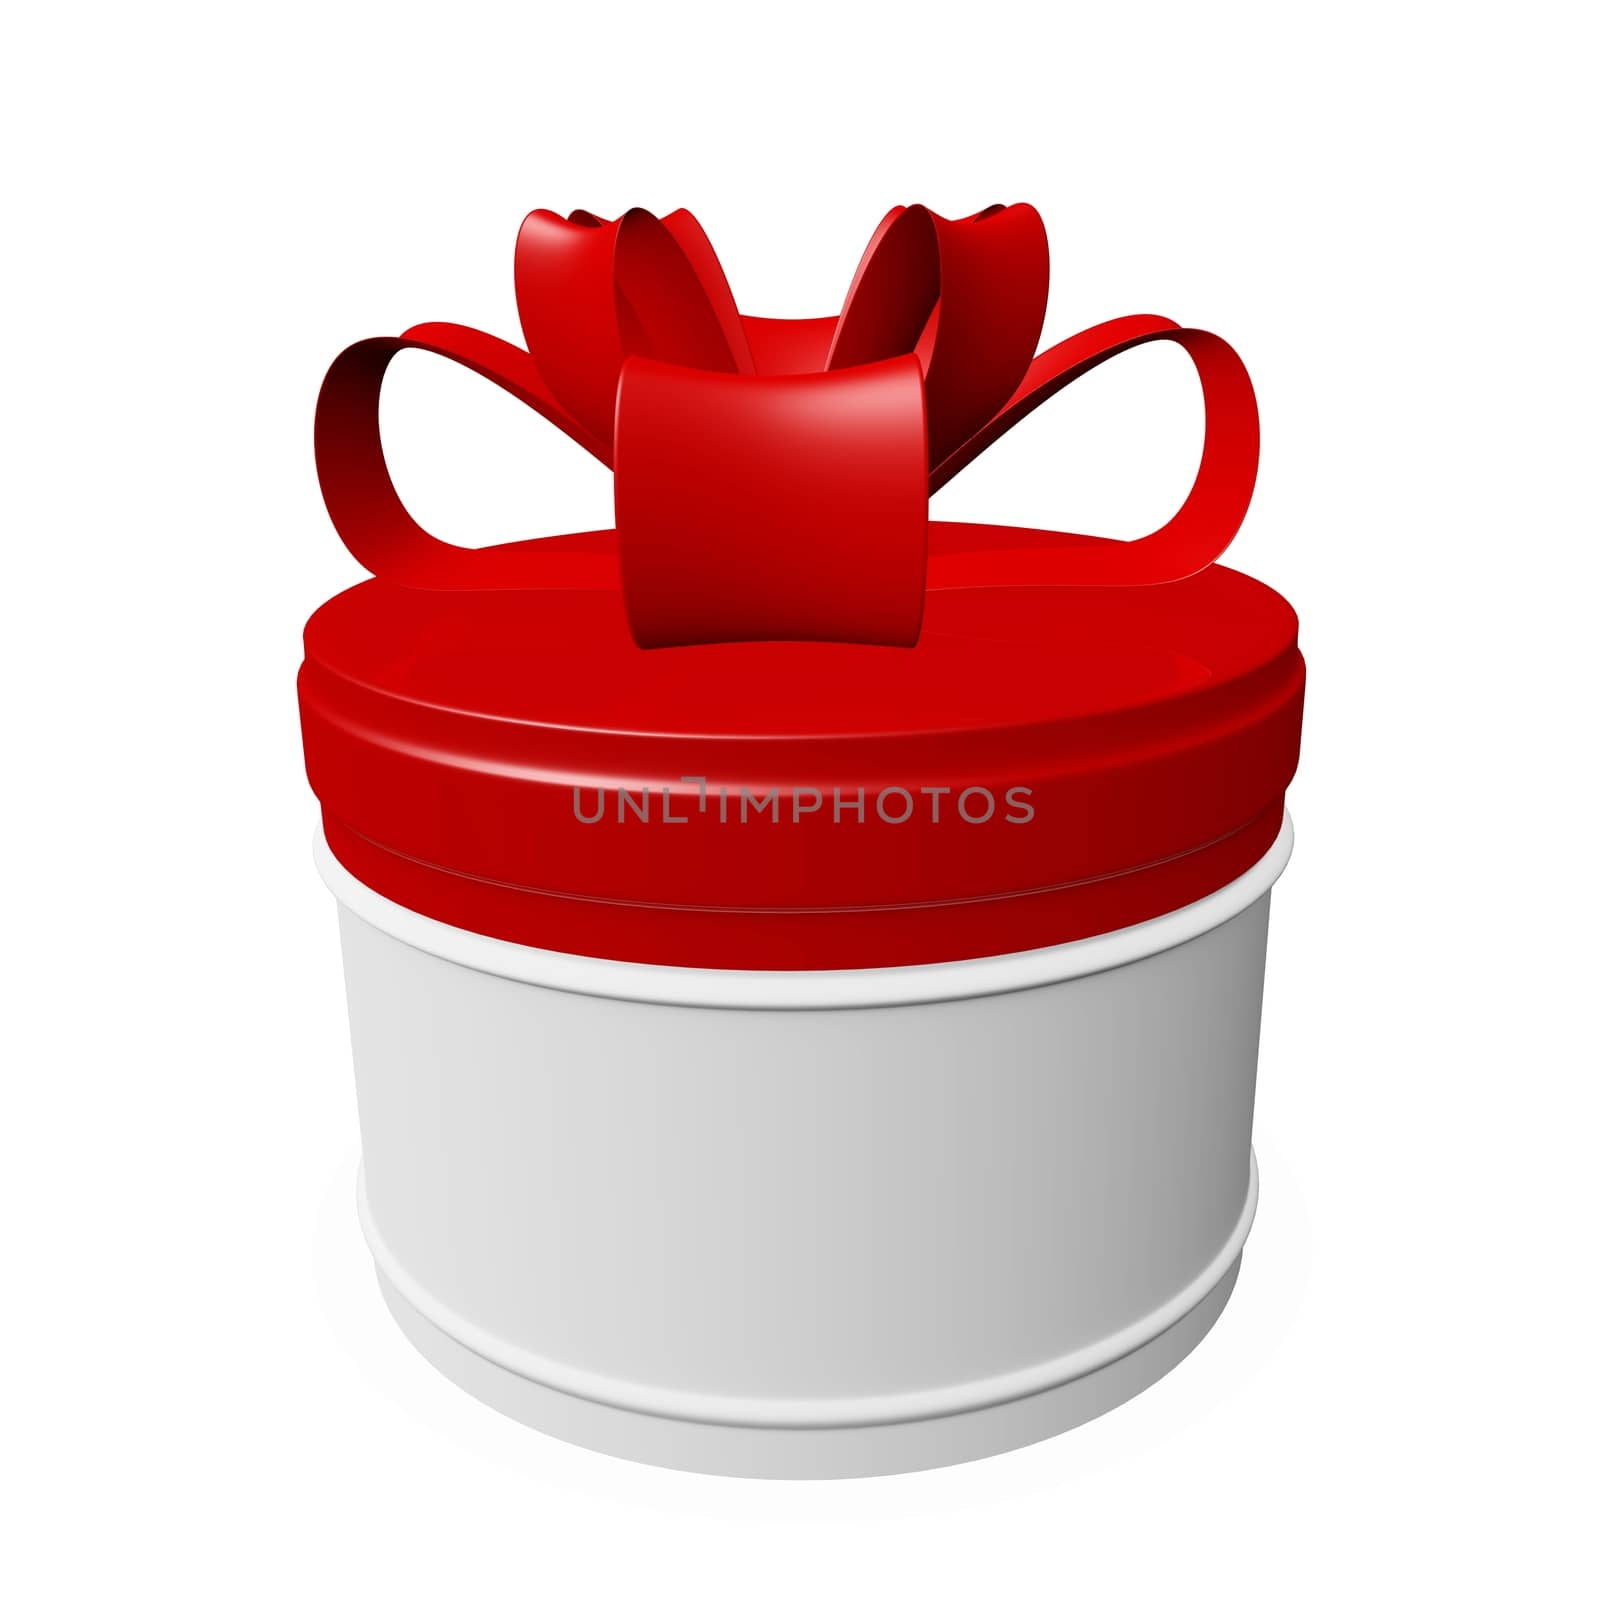 Round Gift Box with Red Lid and Bow Ribbon by RichieThakur